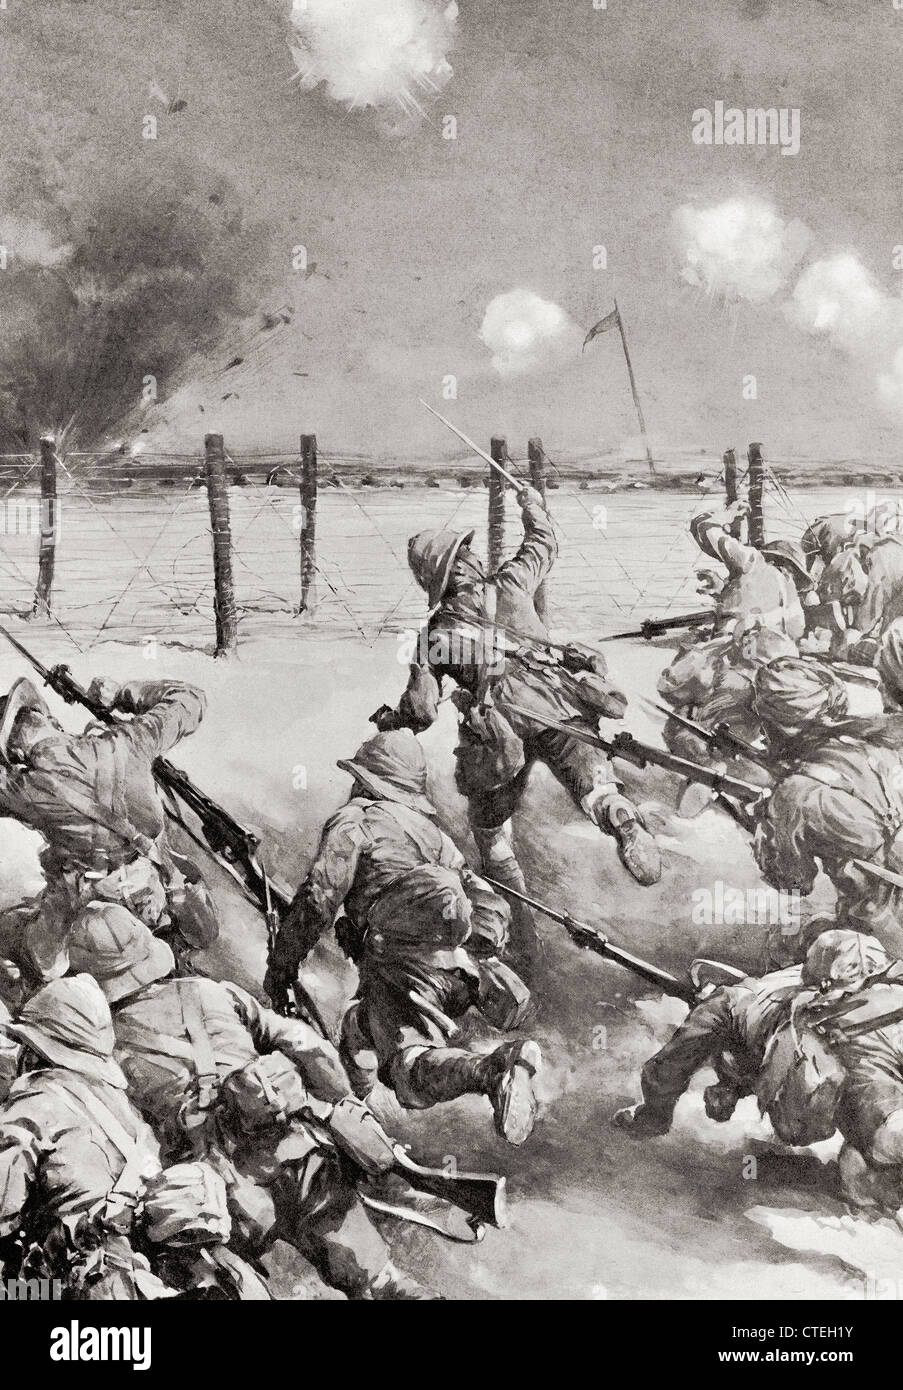 The 2nd Dorsets at Kut-el-Amara attacking the Turkish Redoubts at the Siege of Kut during World War One. Stock Photo